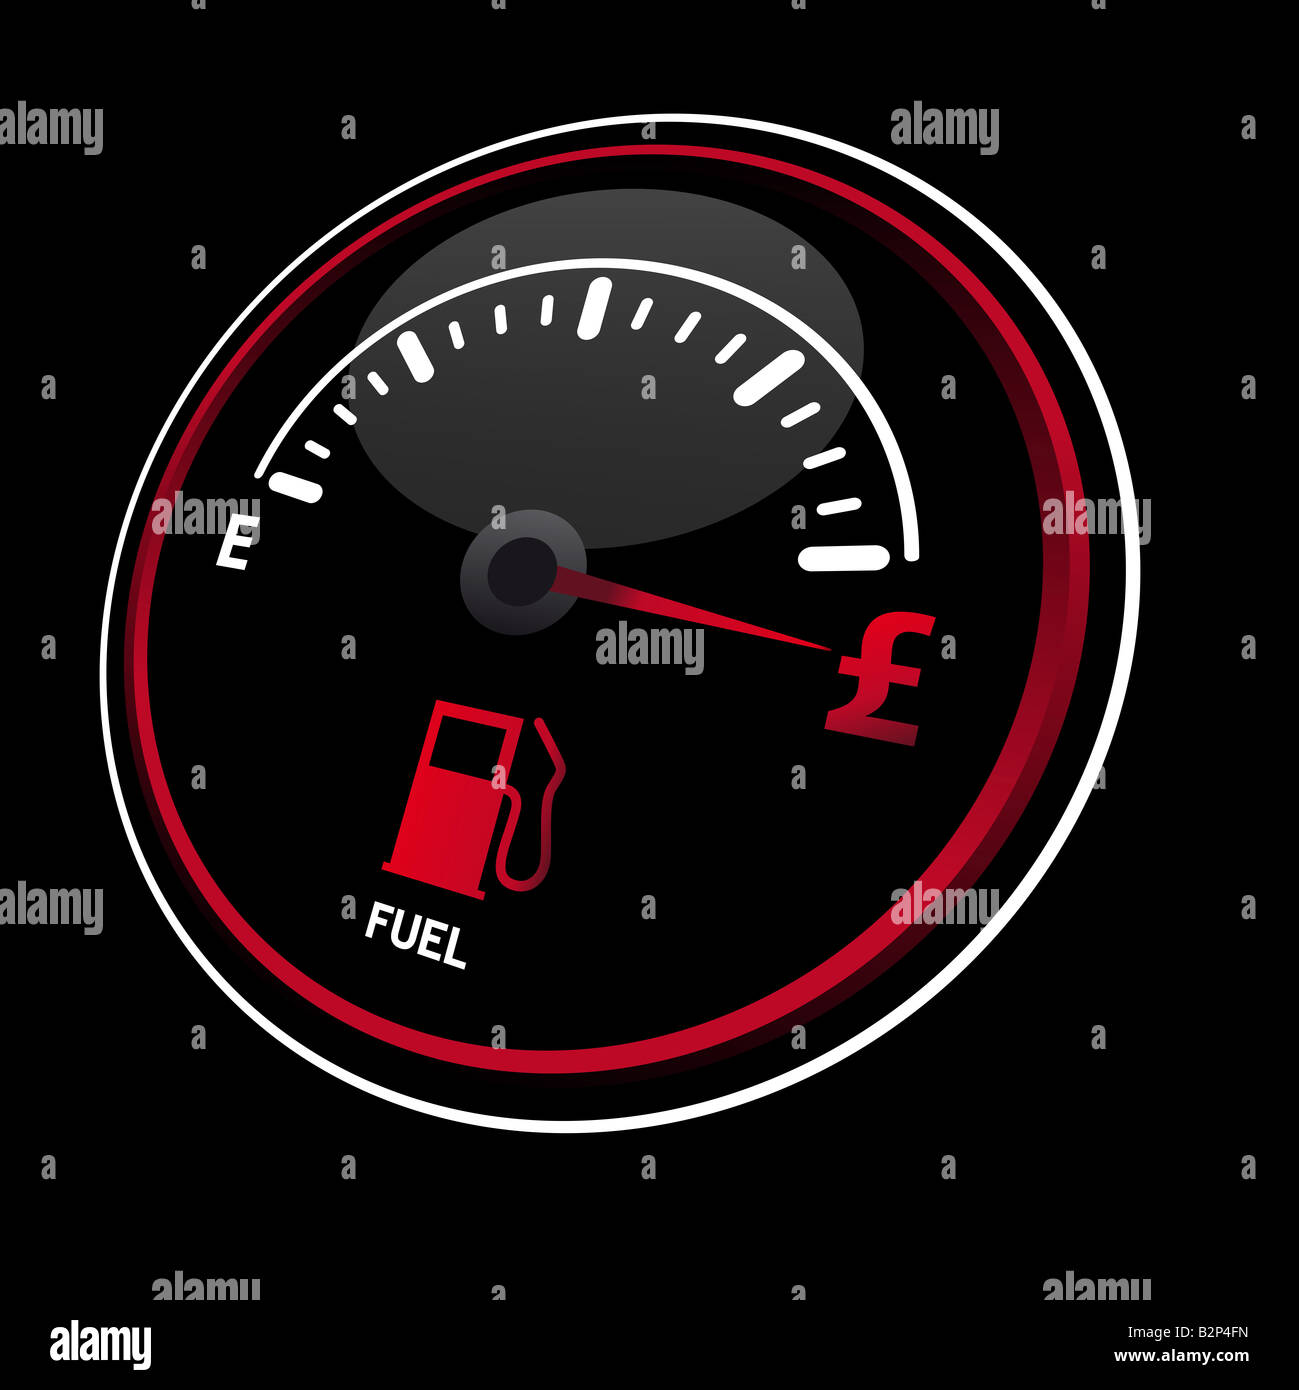 Fuel gauge illustration showing the price of gas Stock Photo